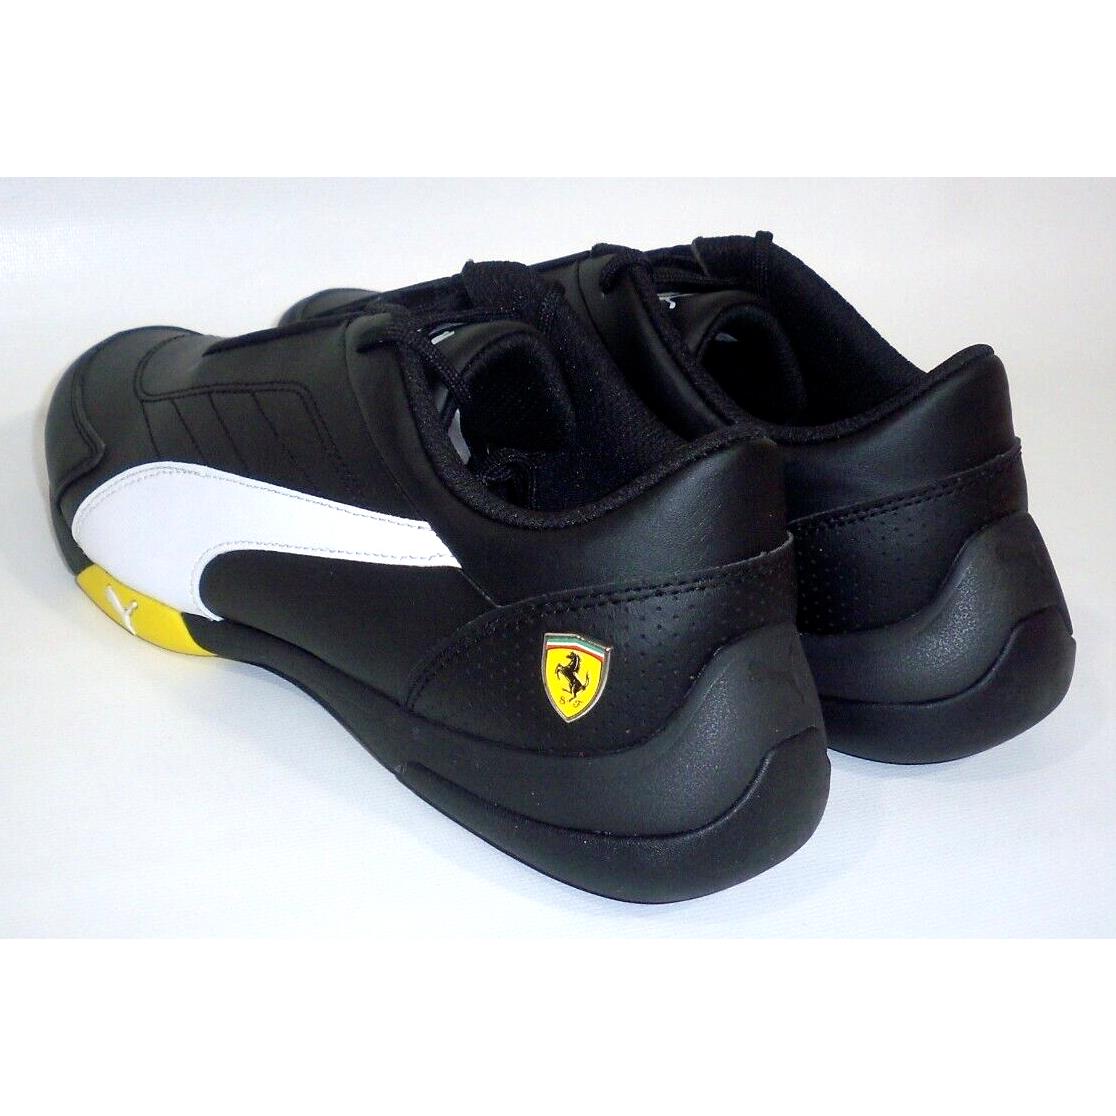 Puma shoes  - Black , Black, White, and Blazing Yellow Manufacturer 0